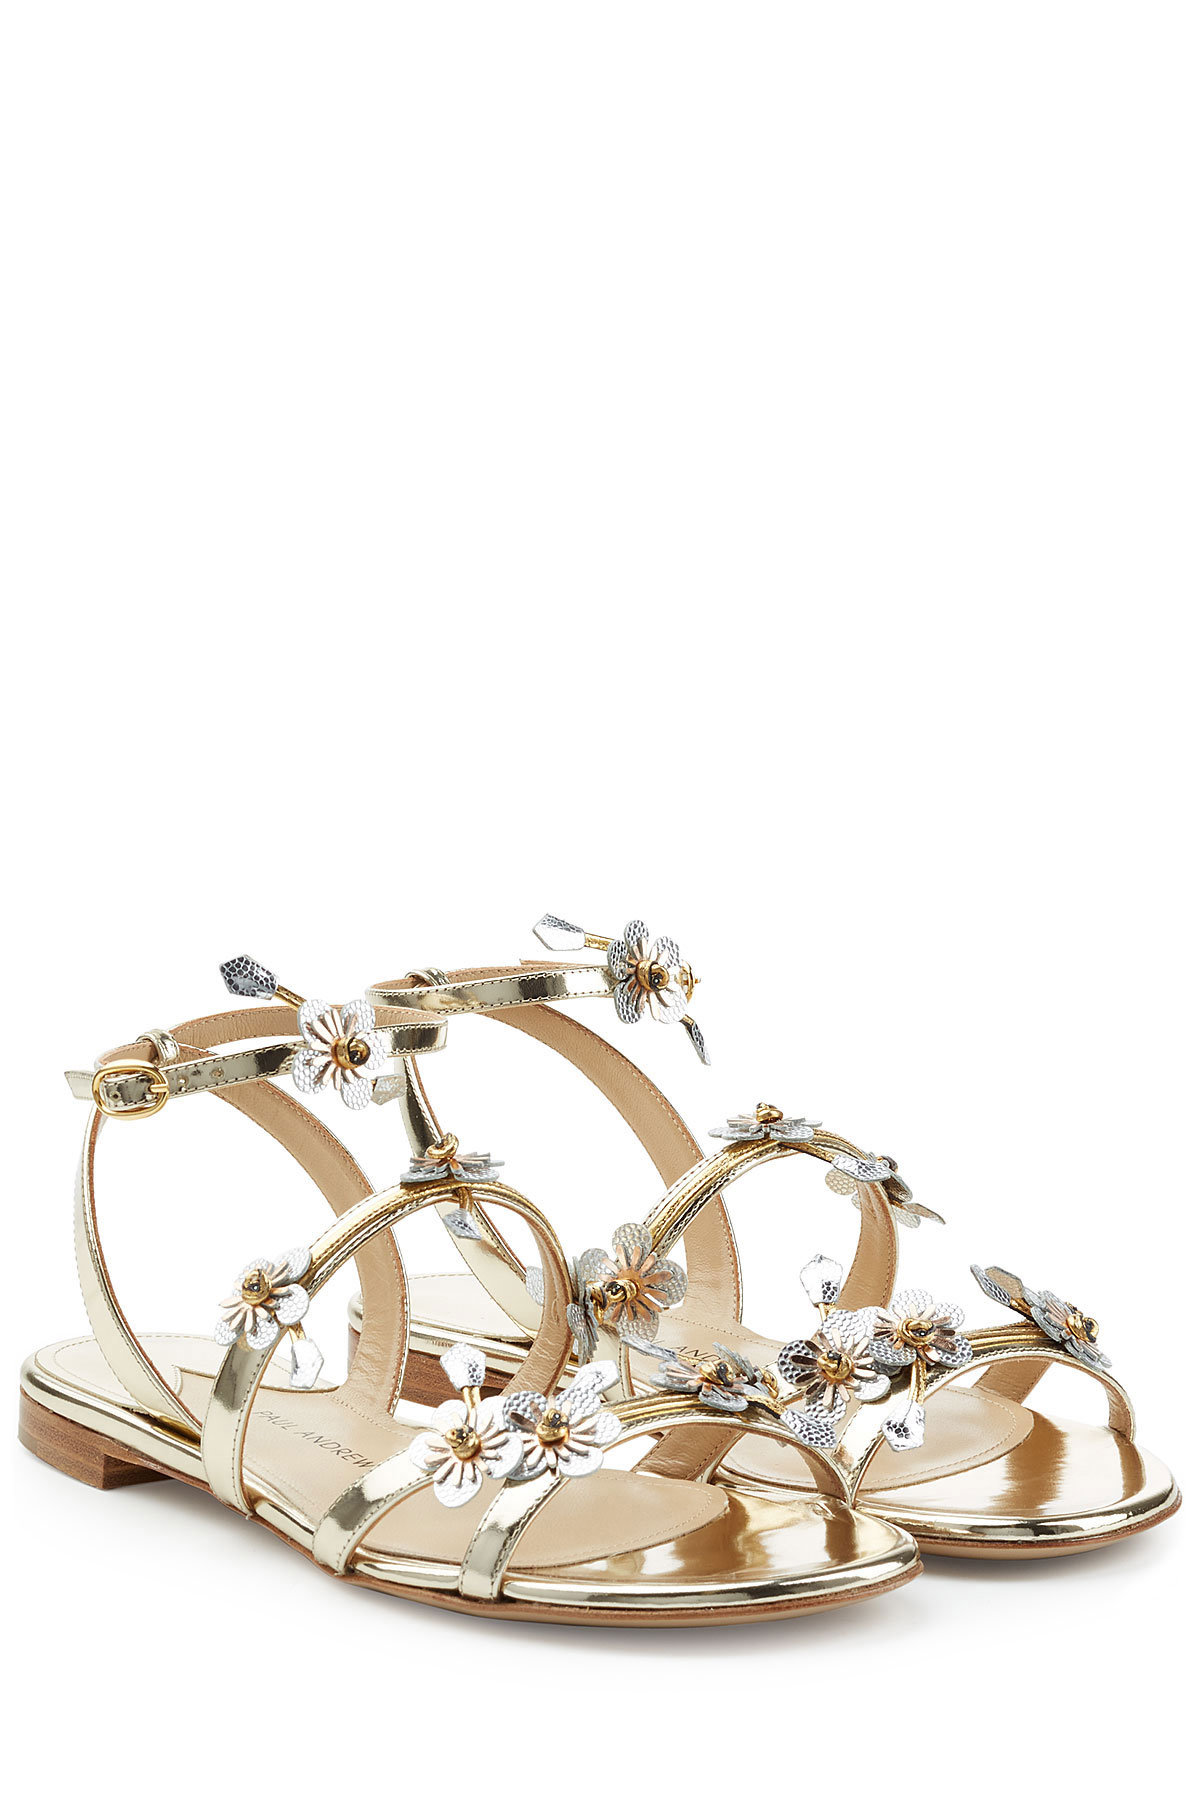 Flora Metallic Leather Sandals by Paul Andrew